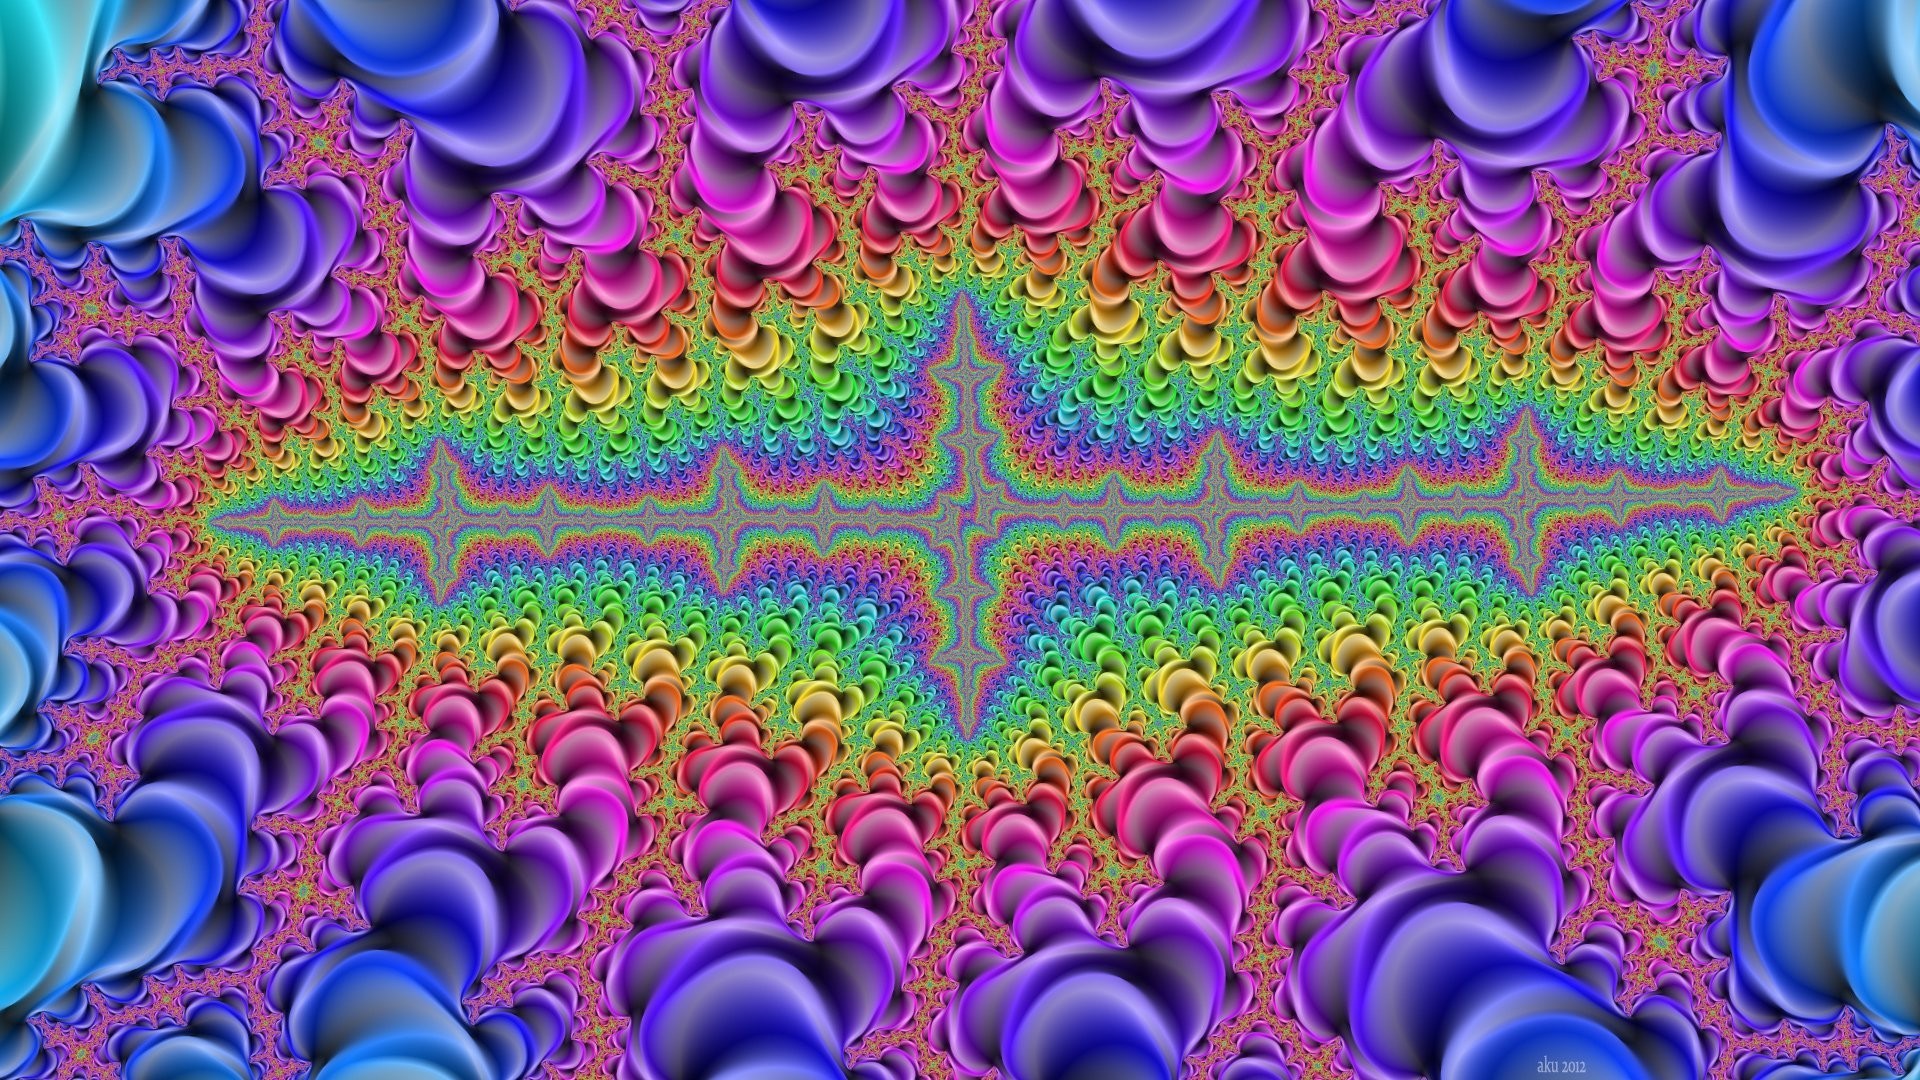 Psychedelic Art Desktop Backgrounds Hd - Psychedelic High Resolution Trippy - HD Wallpaper 